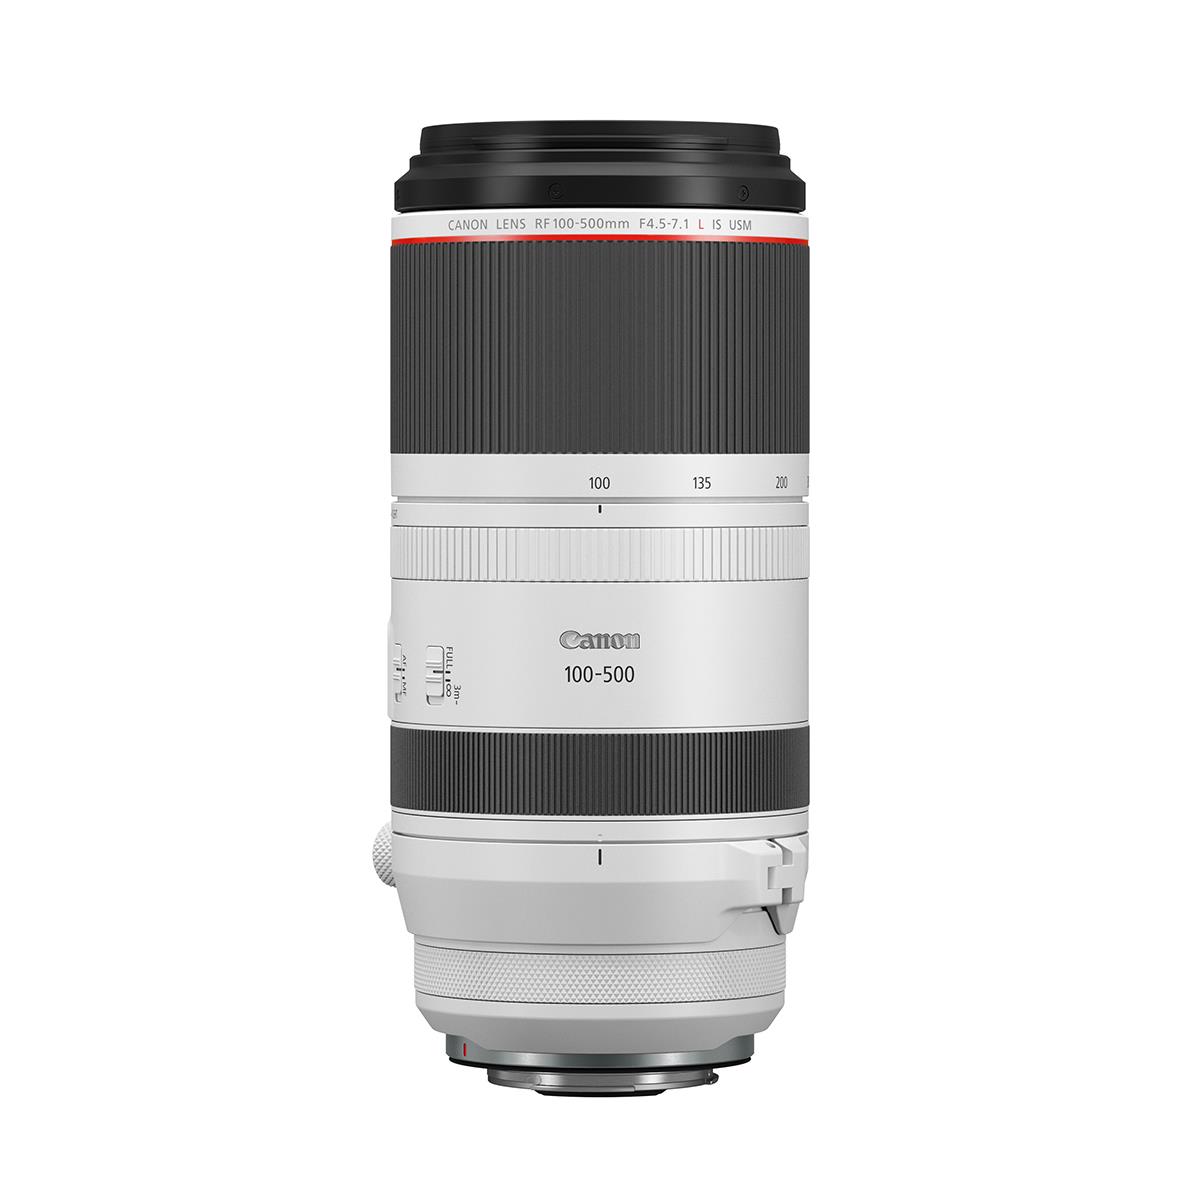 Canon RF 100-500mm F4.5-7.1 L IS USM  Lens